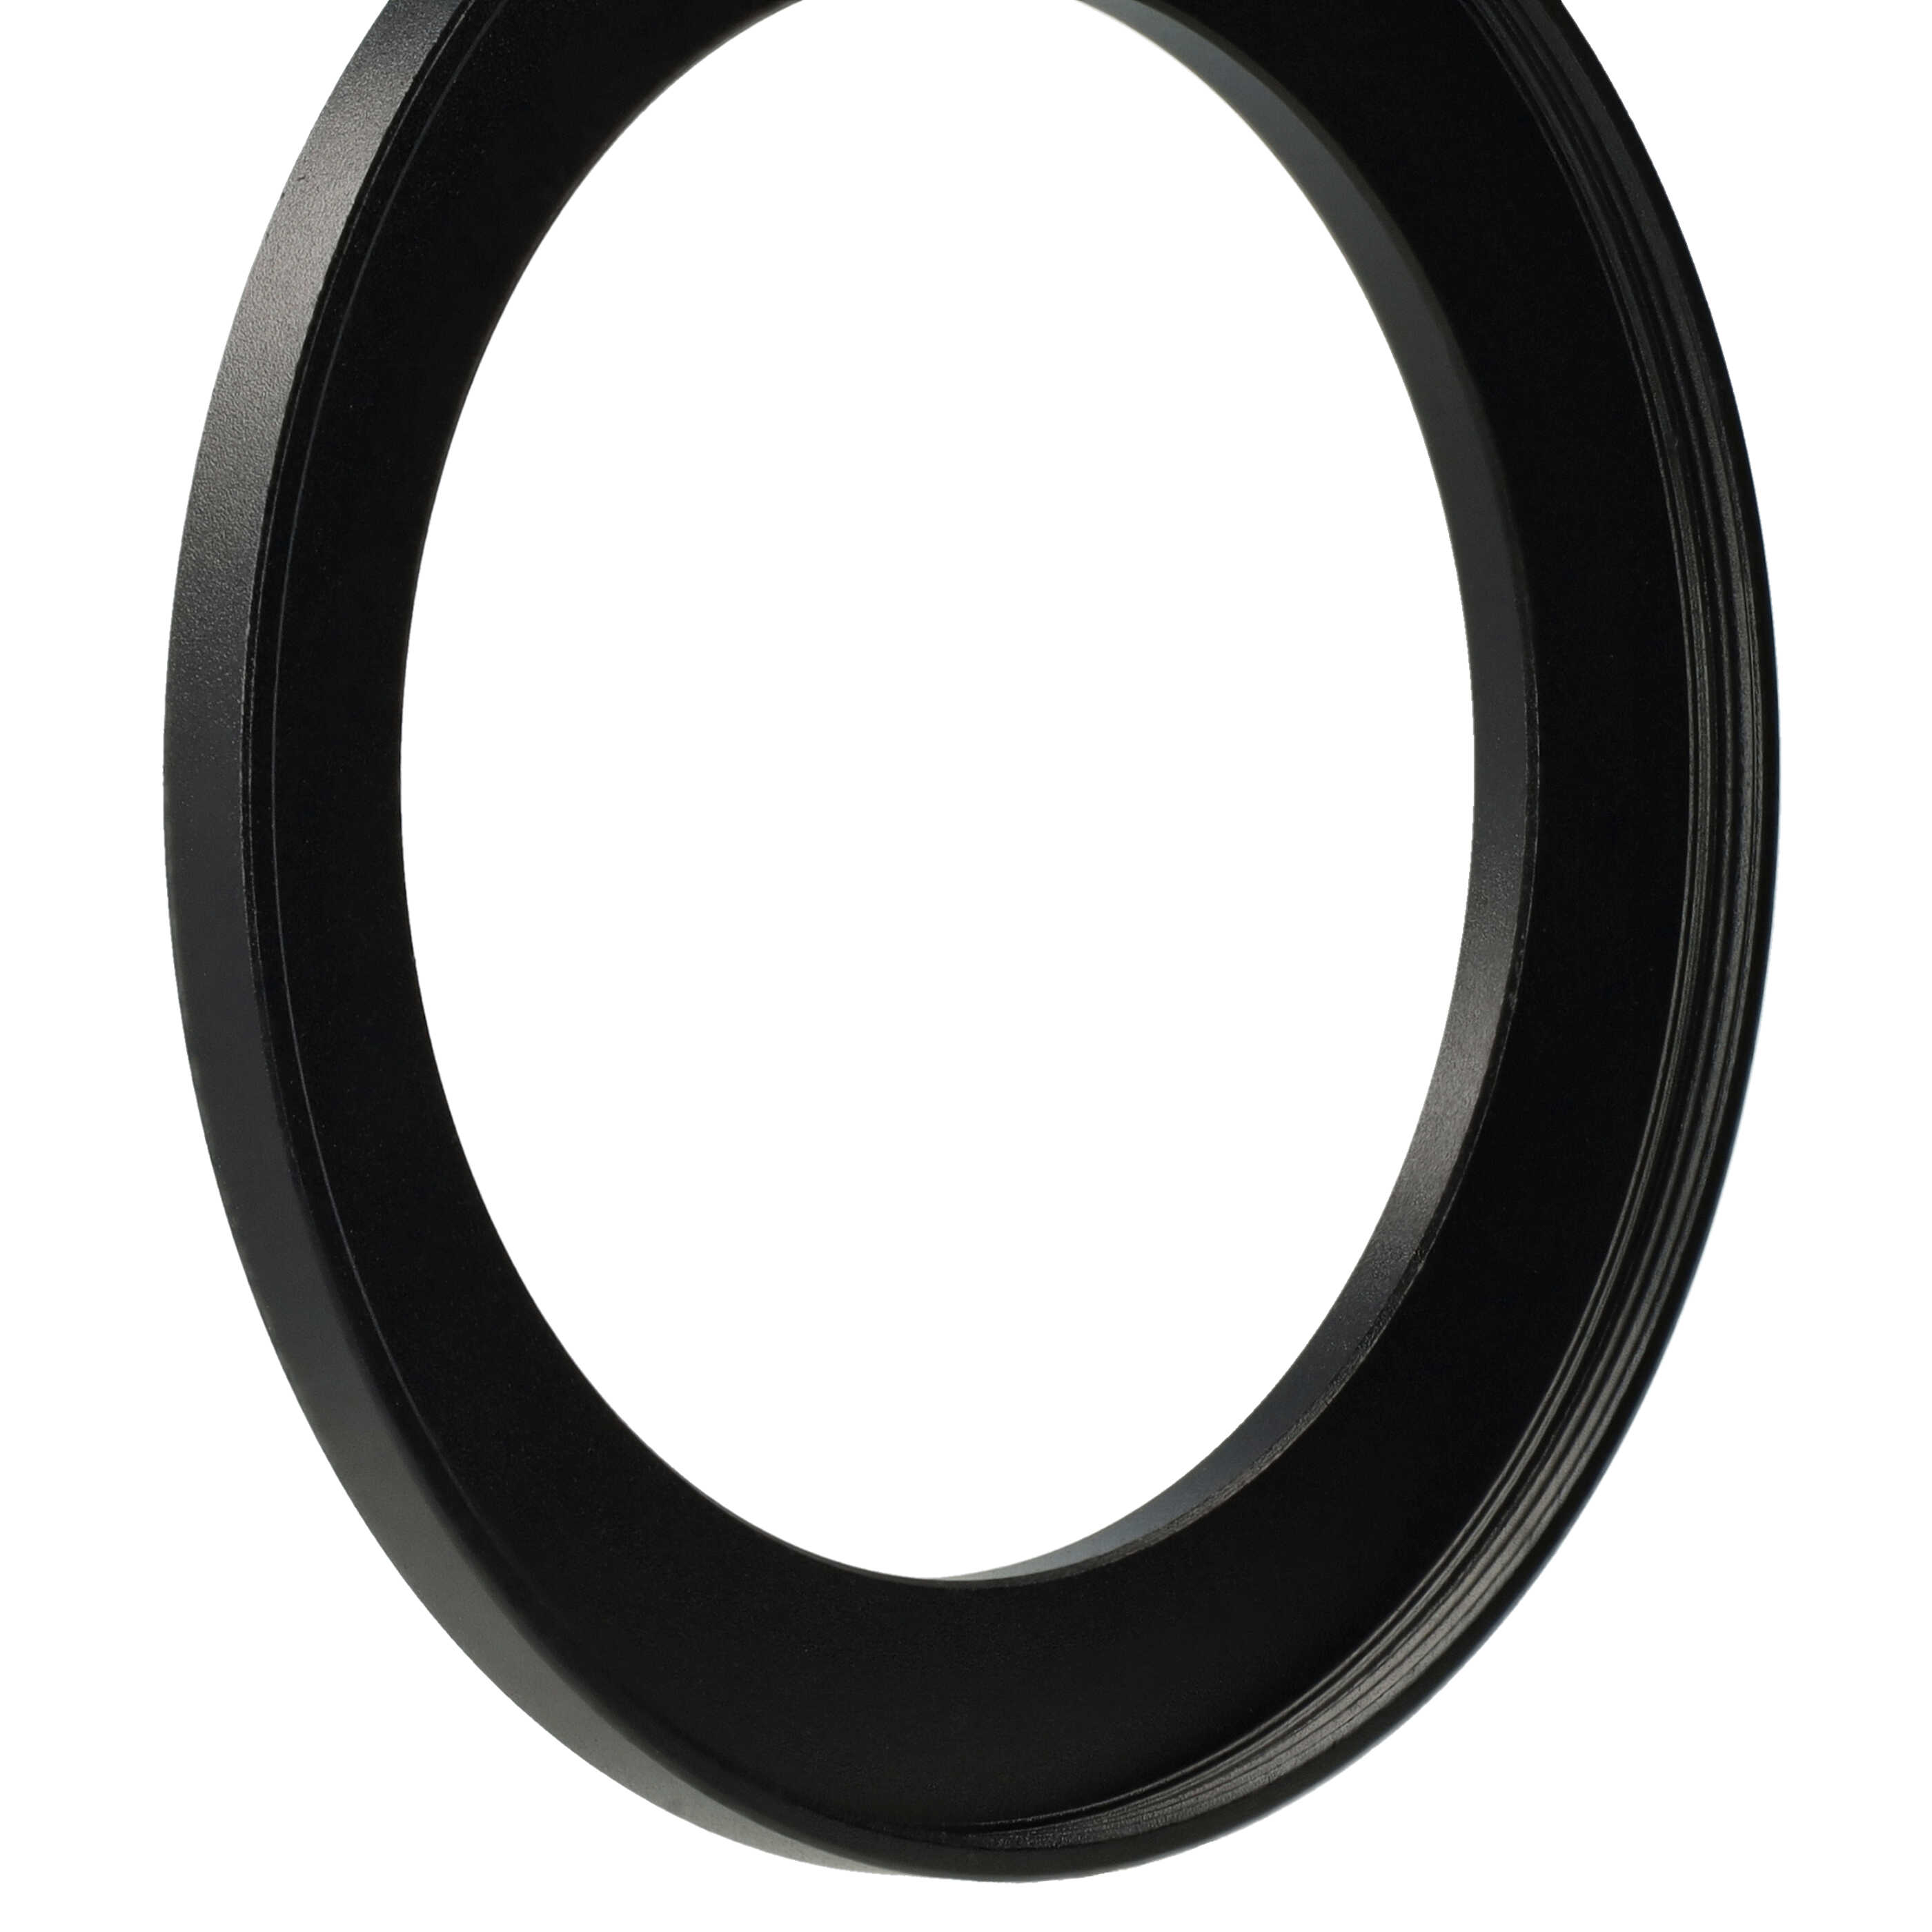 Step-Up Ring Adapter of 58 mm to 72 mmfor various Camera Lens - Filter Adapter